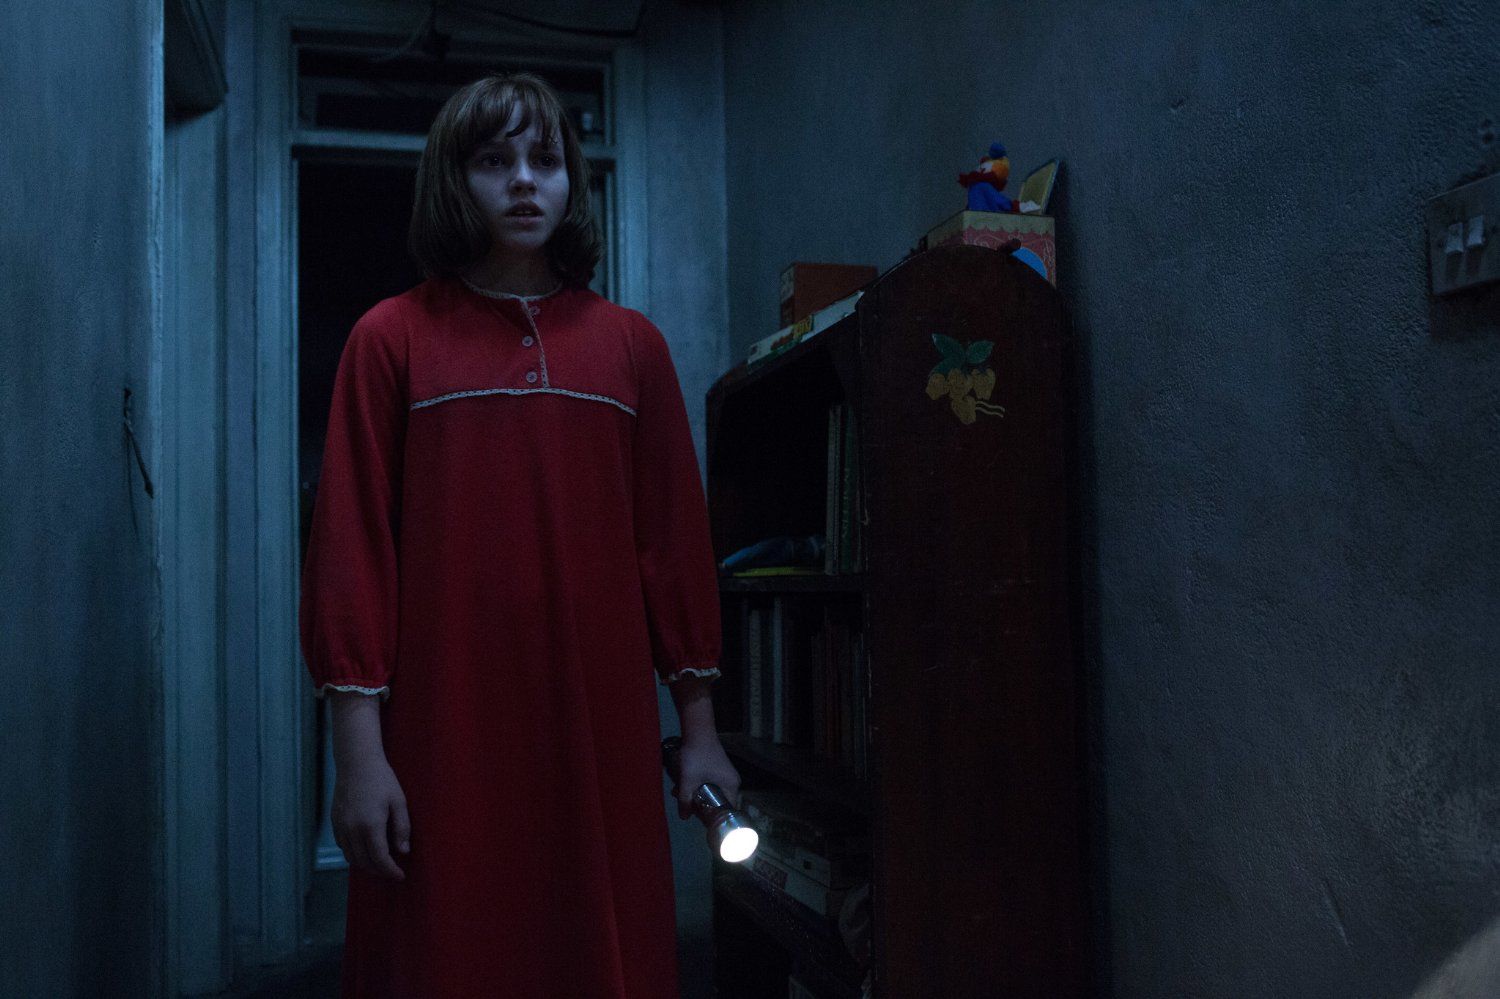 THE CONJURING 2 Featurettes, 41 Image and 2 Posters